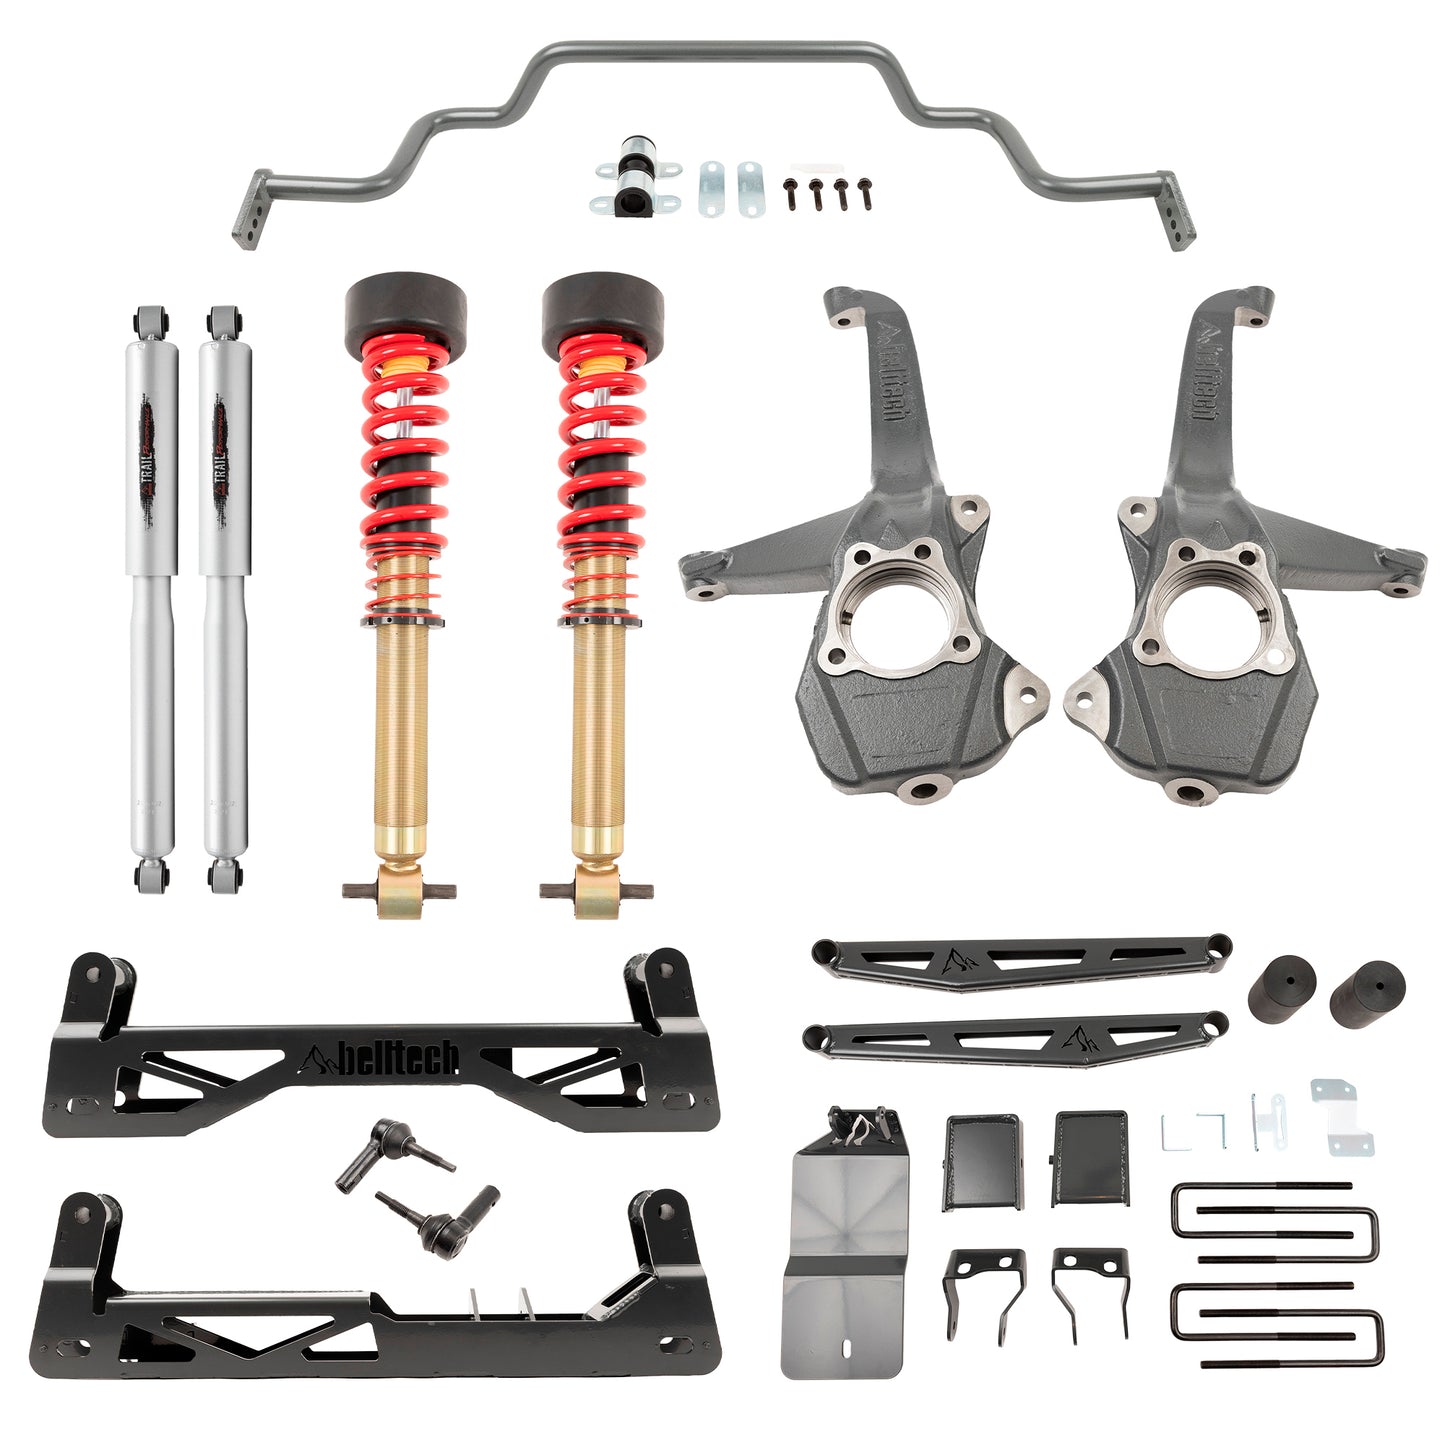 BELLTECH 150210HK LIFT KIT 6-8in. Lift Kit Inc. Front and Rear Trail Performance Coilovers/Shocks 2019-2021 GM Silverado/Sierra 1500 2WD/4WD 6-8in. Lift with Trail Peformance Coilovers/Shocks